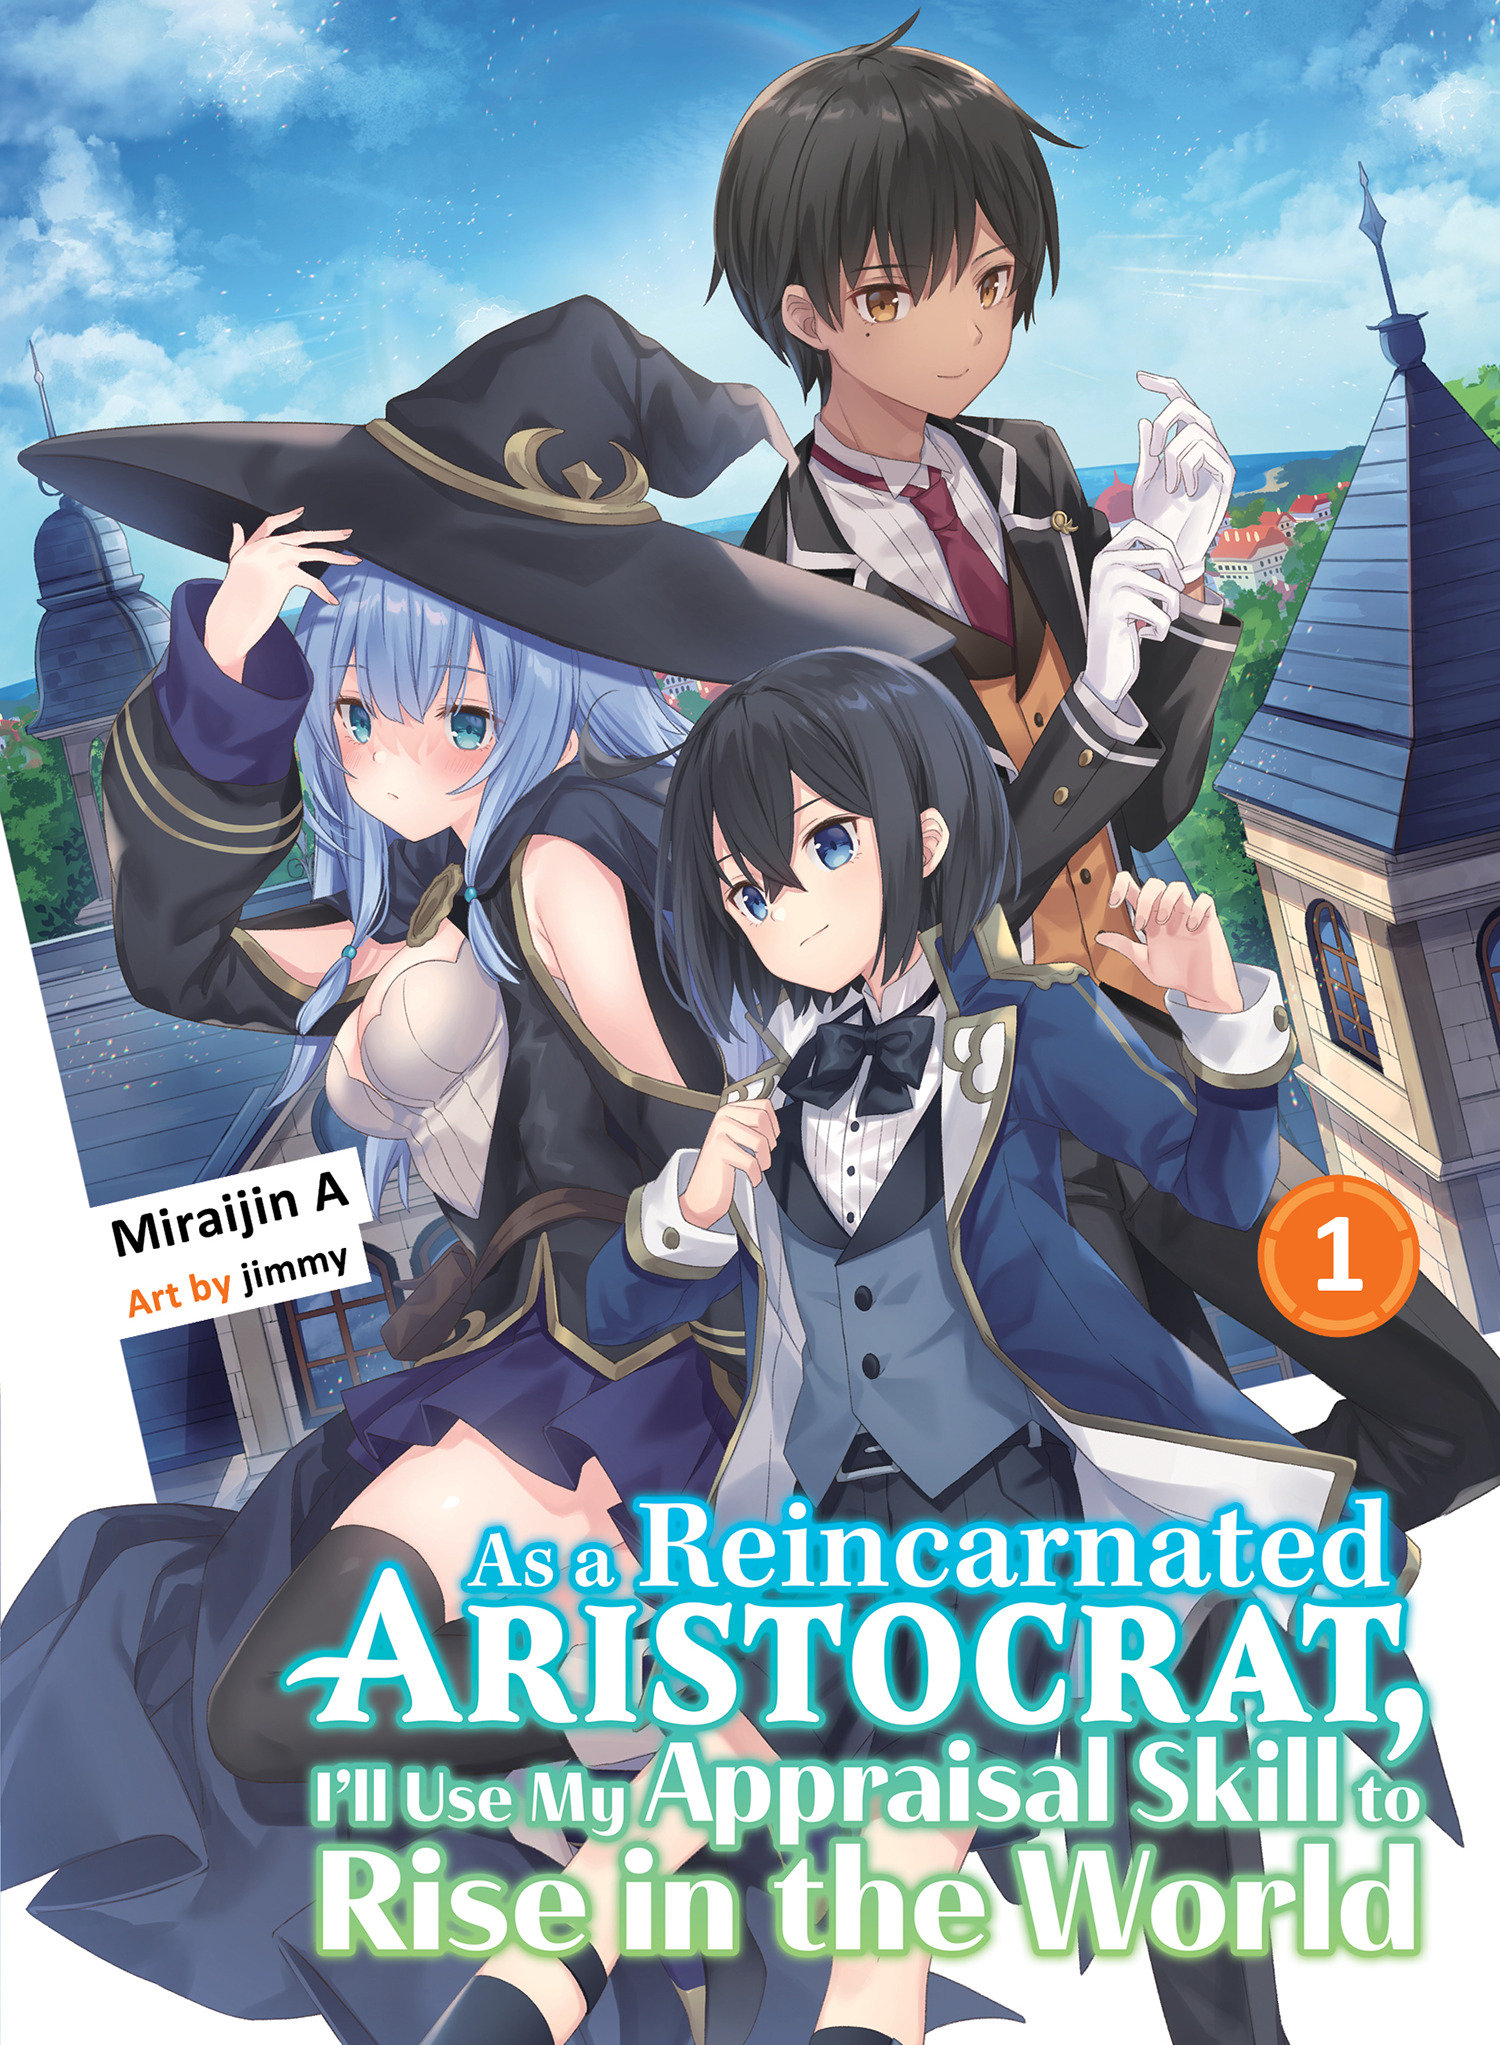 As A Reincarnated Aristocrat, I'll Use My Appraisal Skill to Rise in the World Light Novel Volume 1